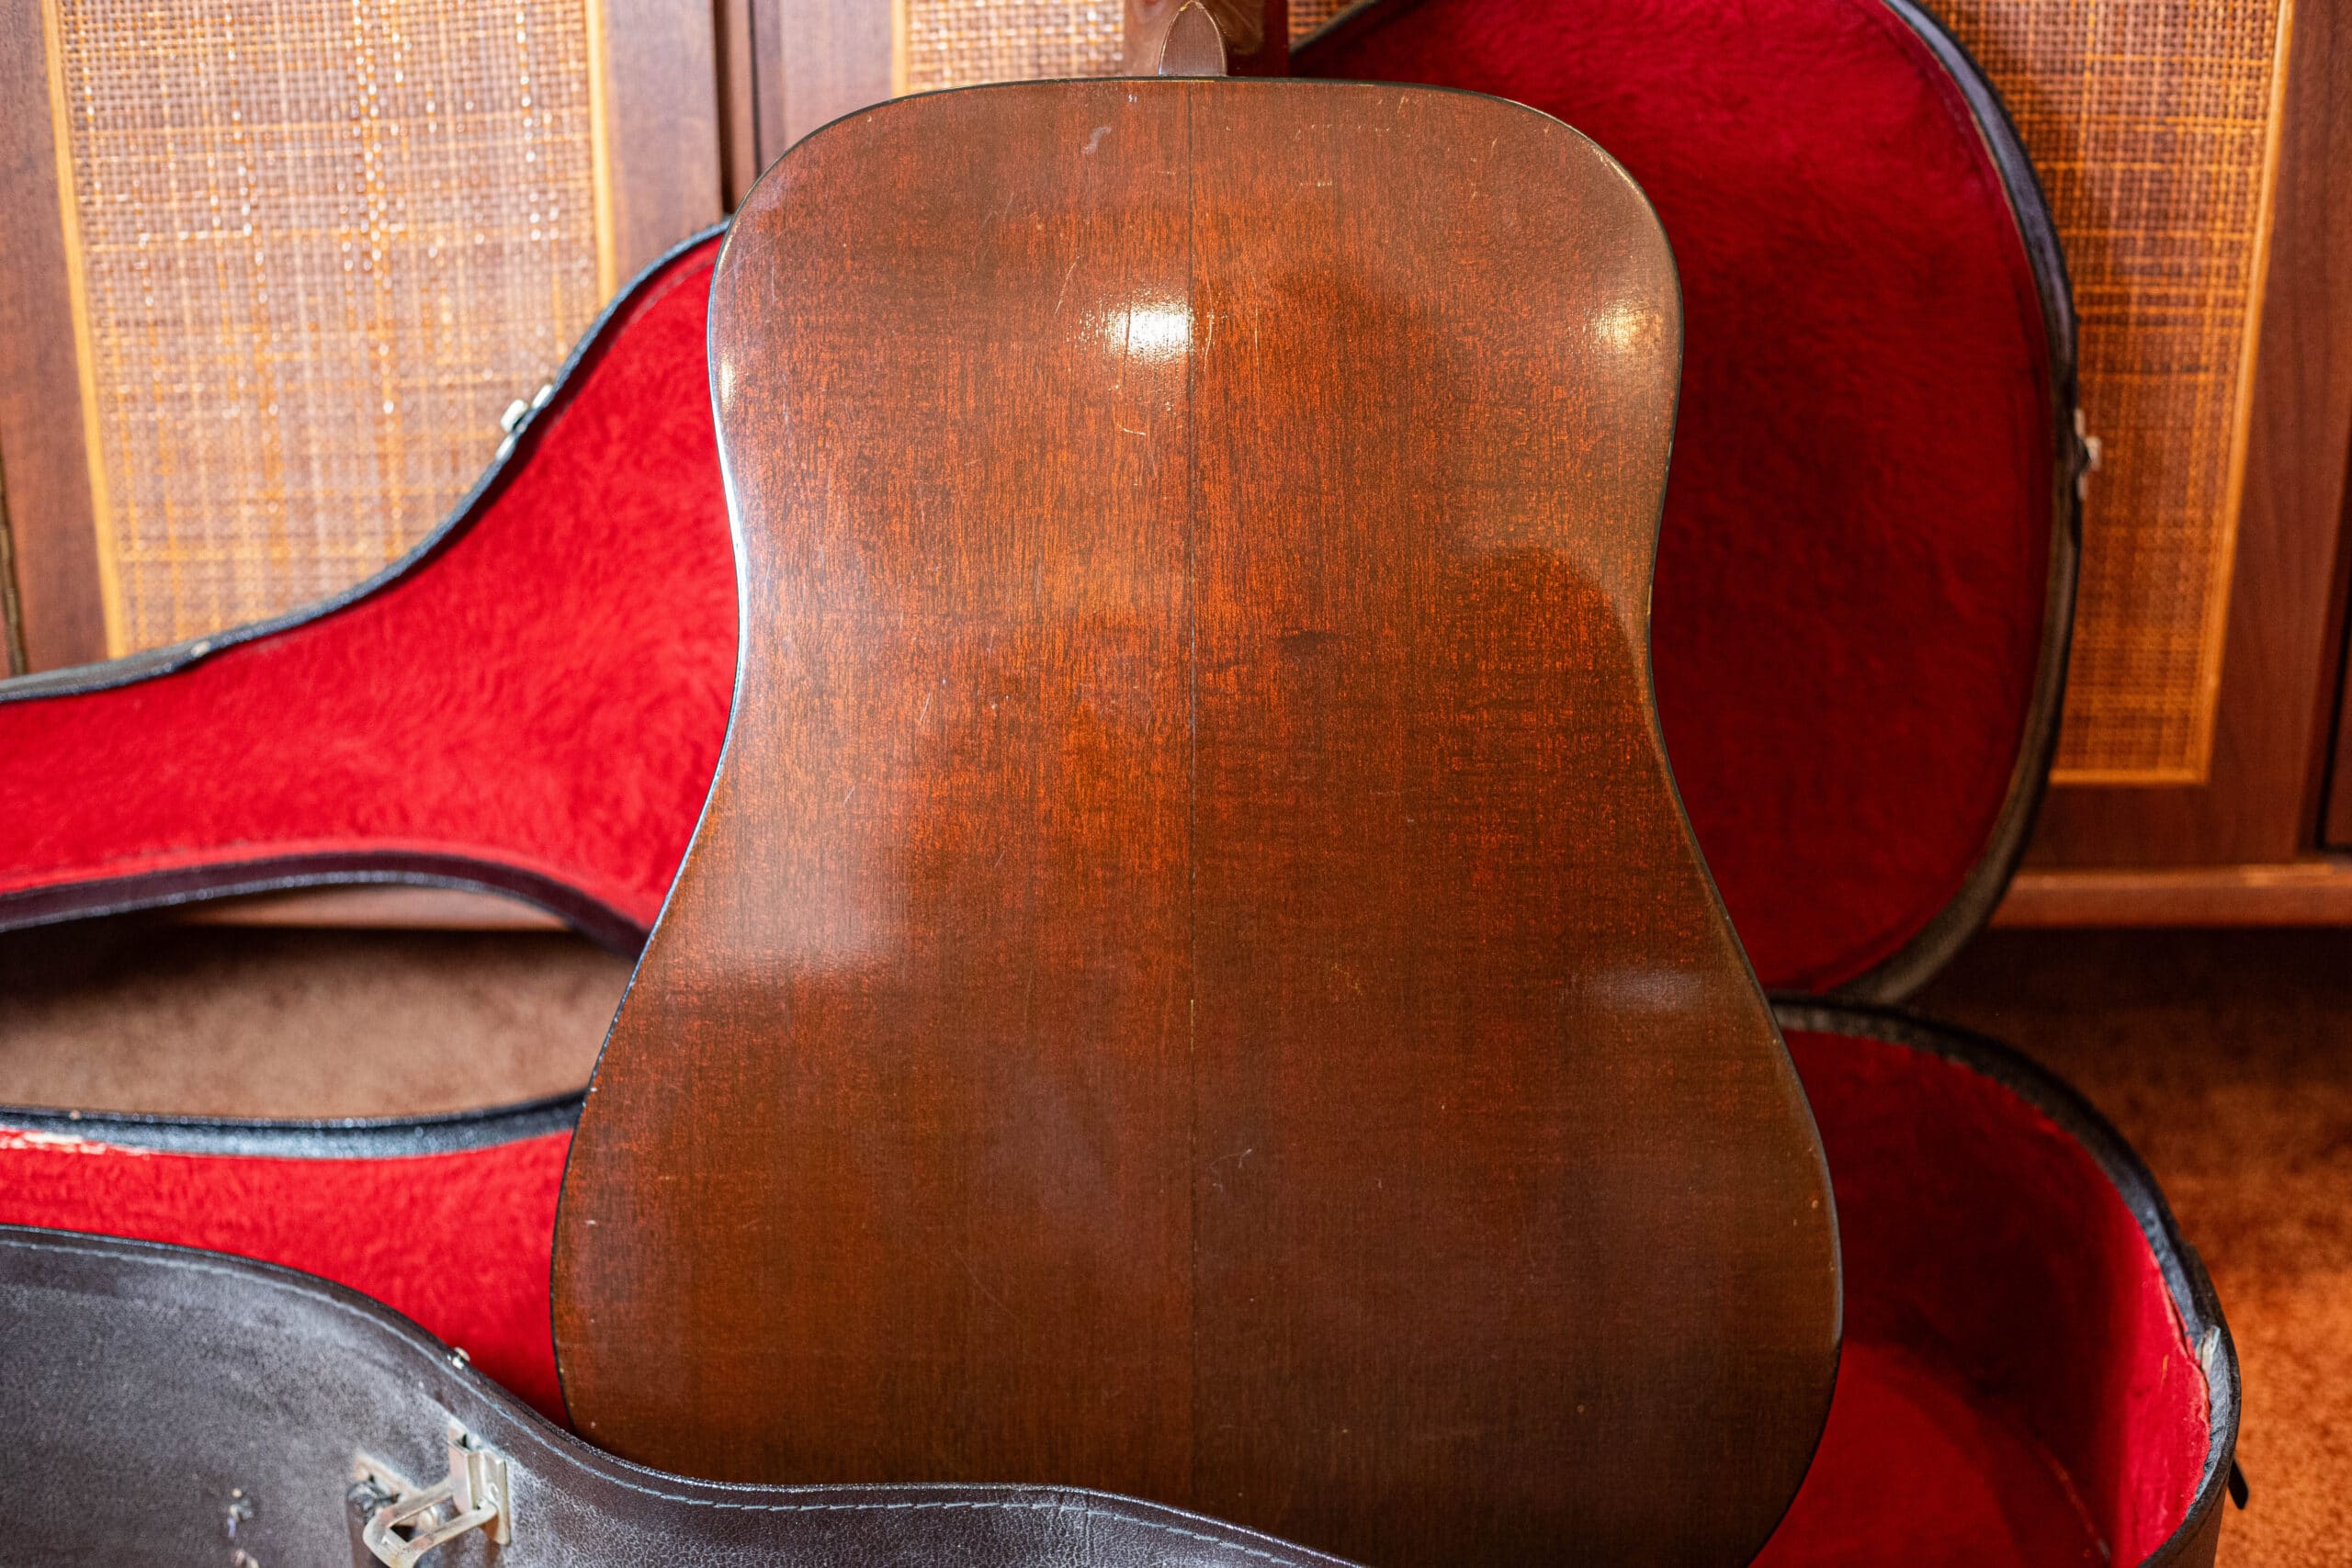 The back of the body of a 1967 Martin D-18.